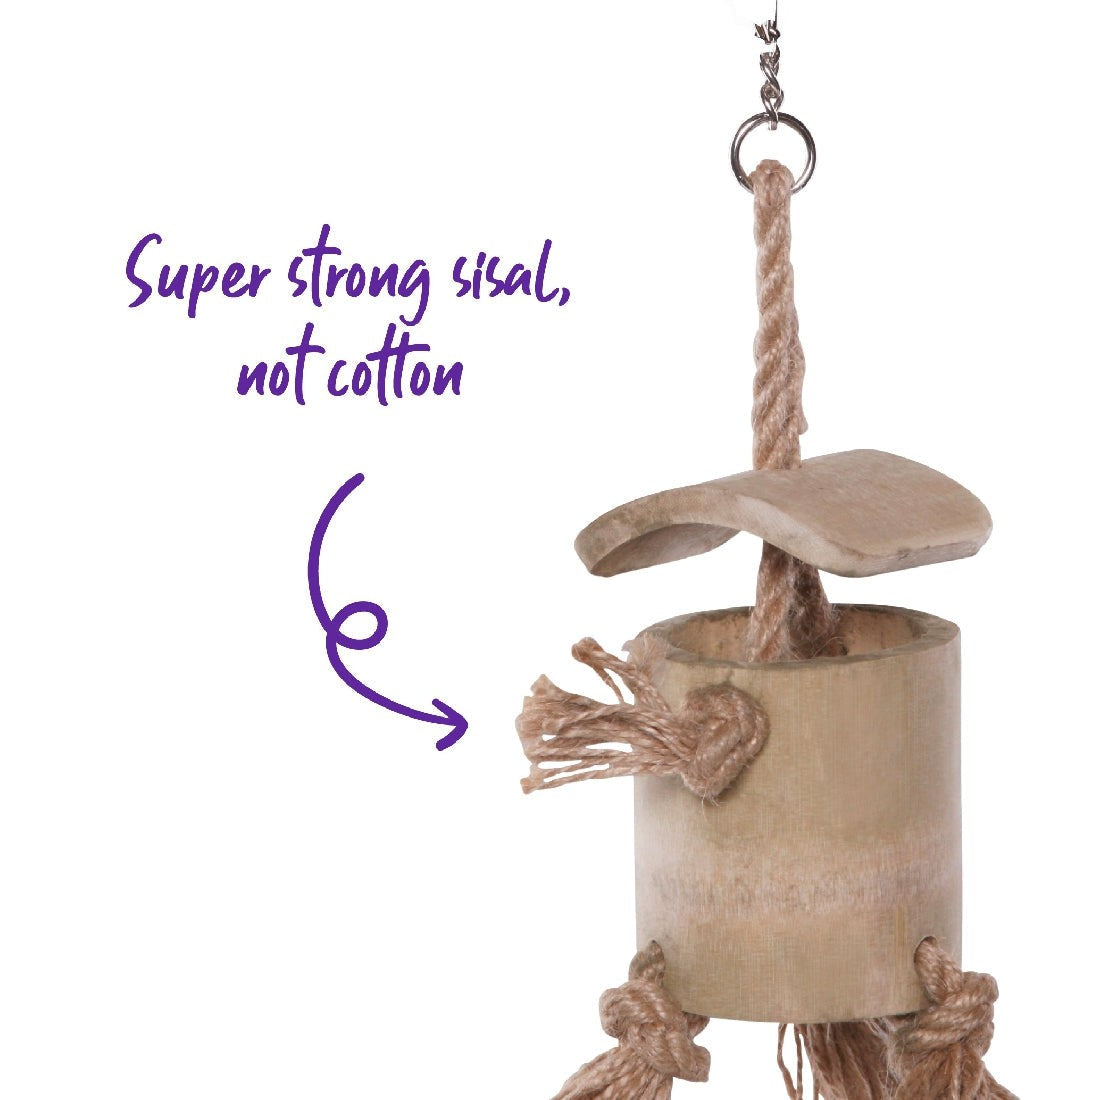 Hanging bird toy made of super strong sisal, not cotton.